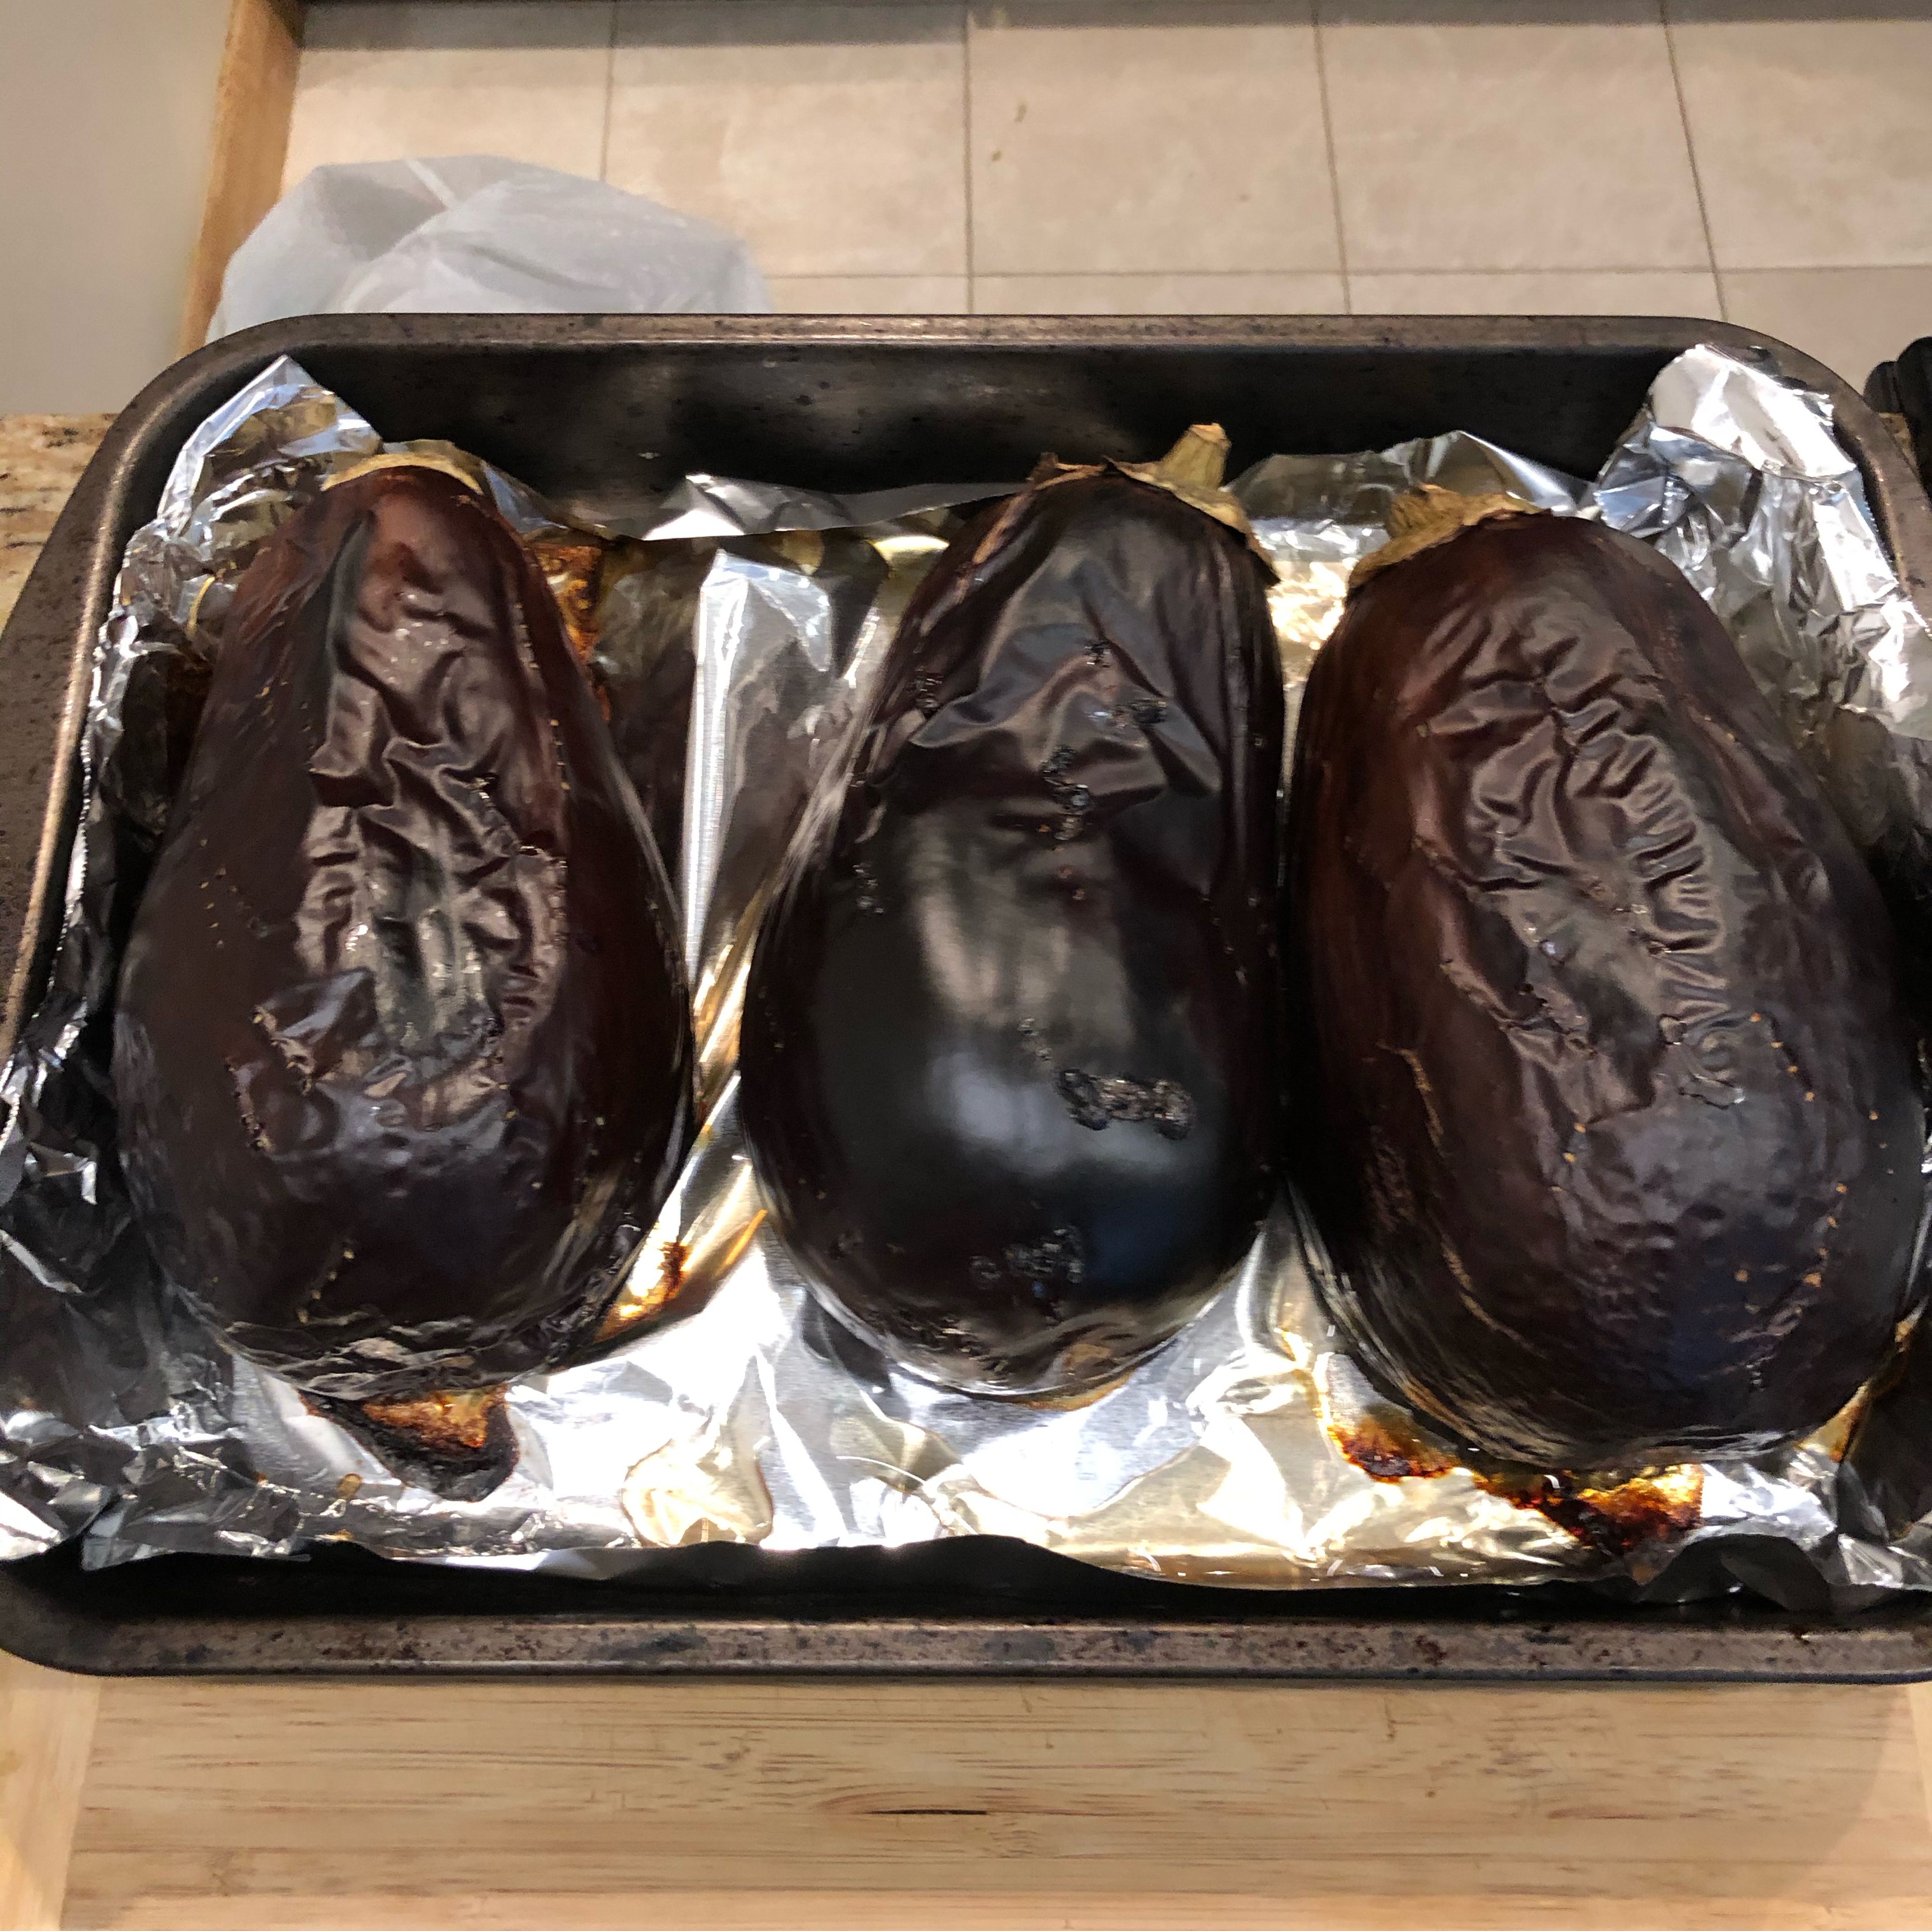 Put foil paper in a pan and place eggplants side by side. If you can make the stalk opposite direction of one another (optional). Broil on high for between 30mins to 45mins. It might be longer or shorter depending on your oven. You want to take the eggplants out of the oven once they are soft. (Pictured above)